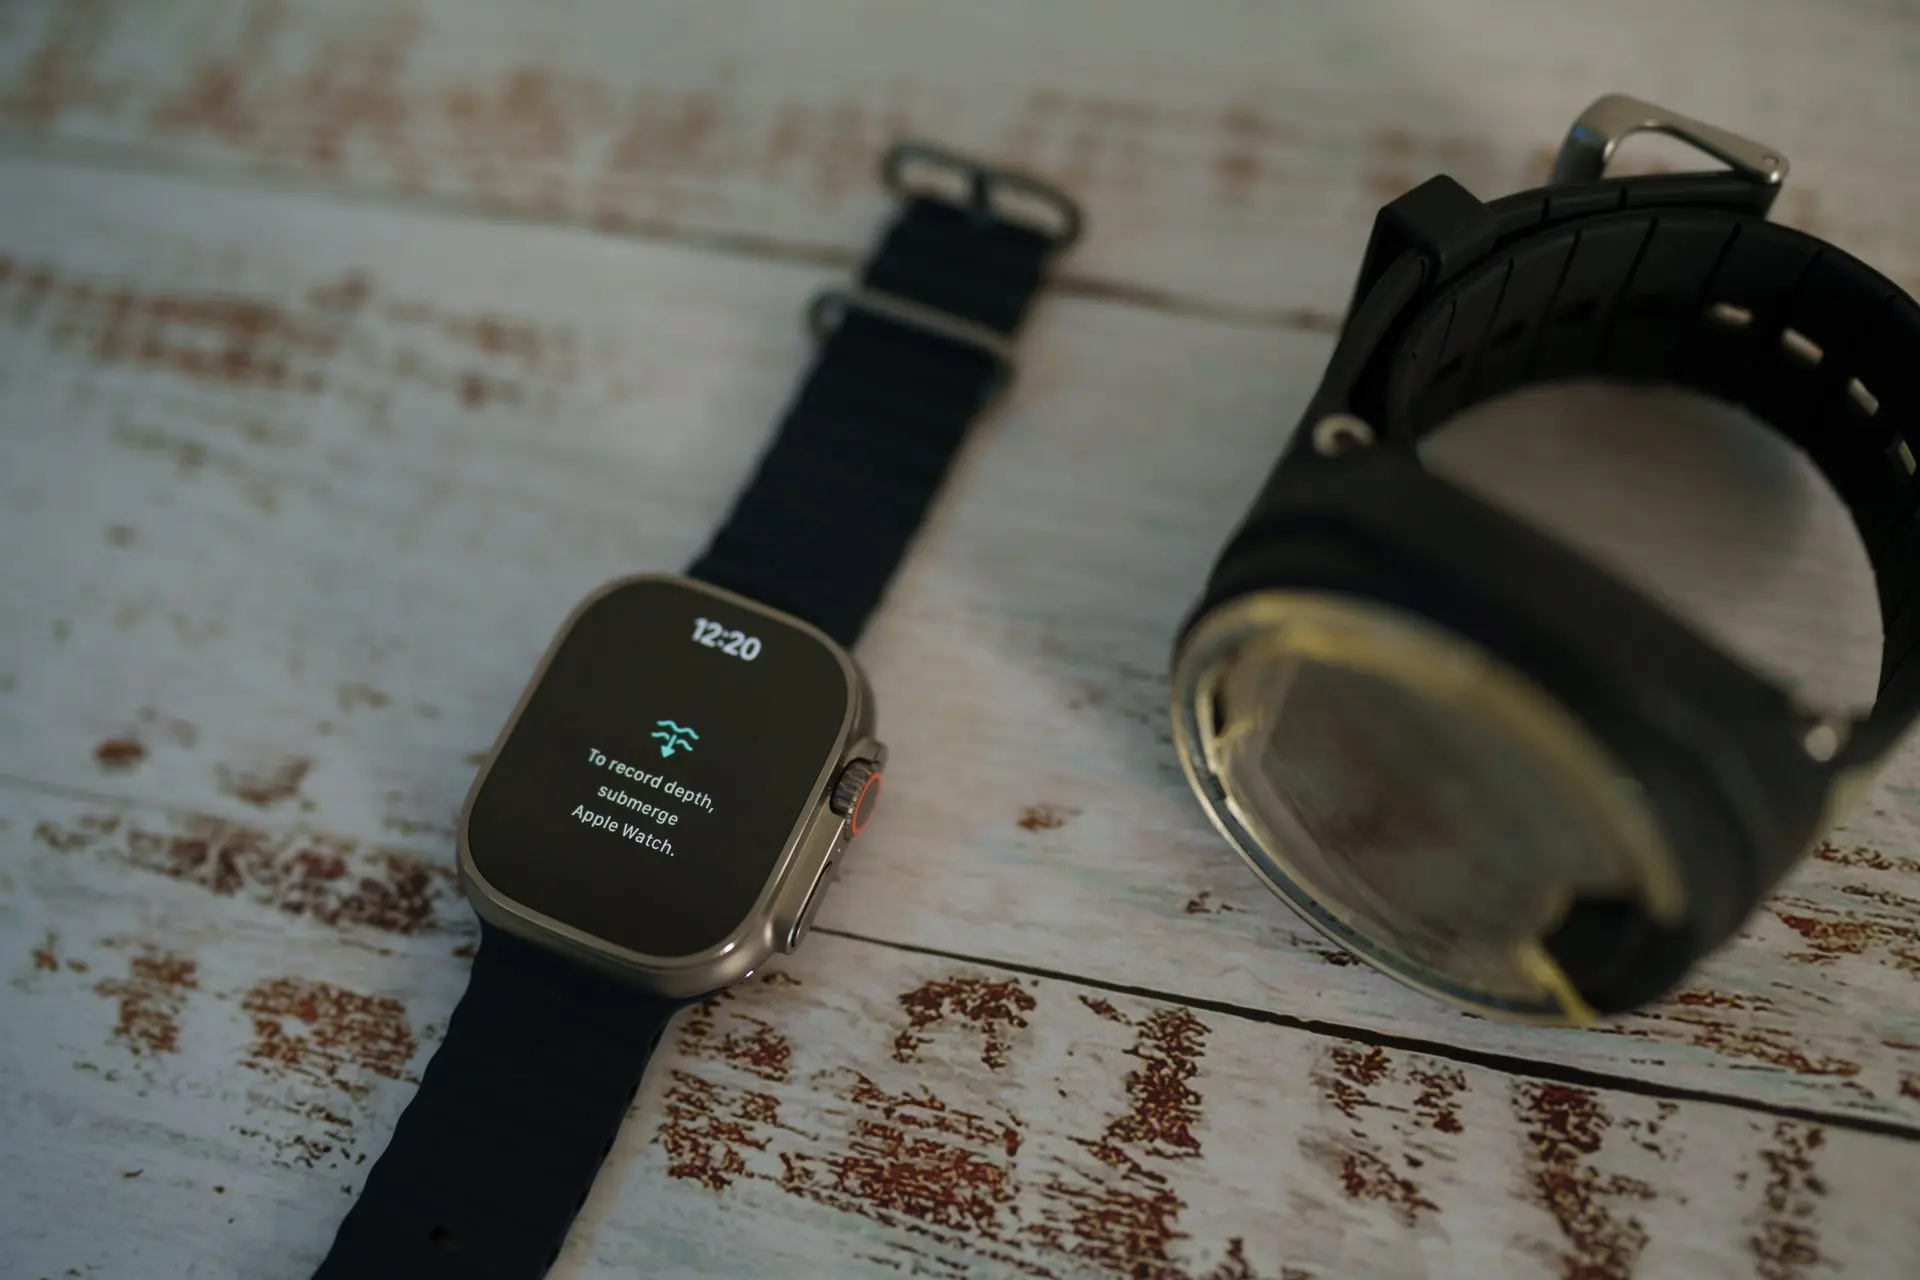 Apple Watch Ultra 2 first impressions: A brighter future for Siri